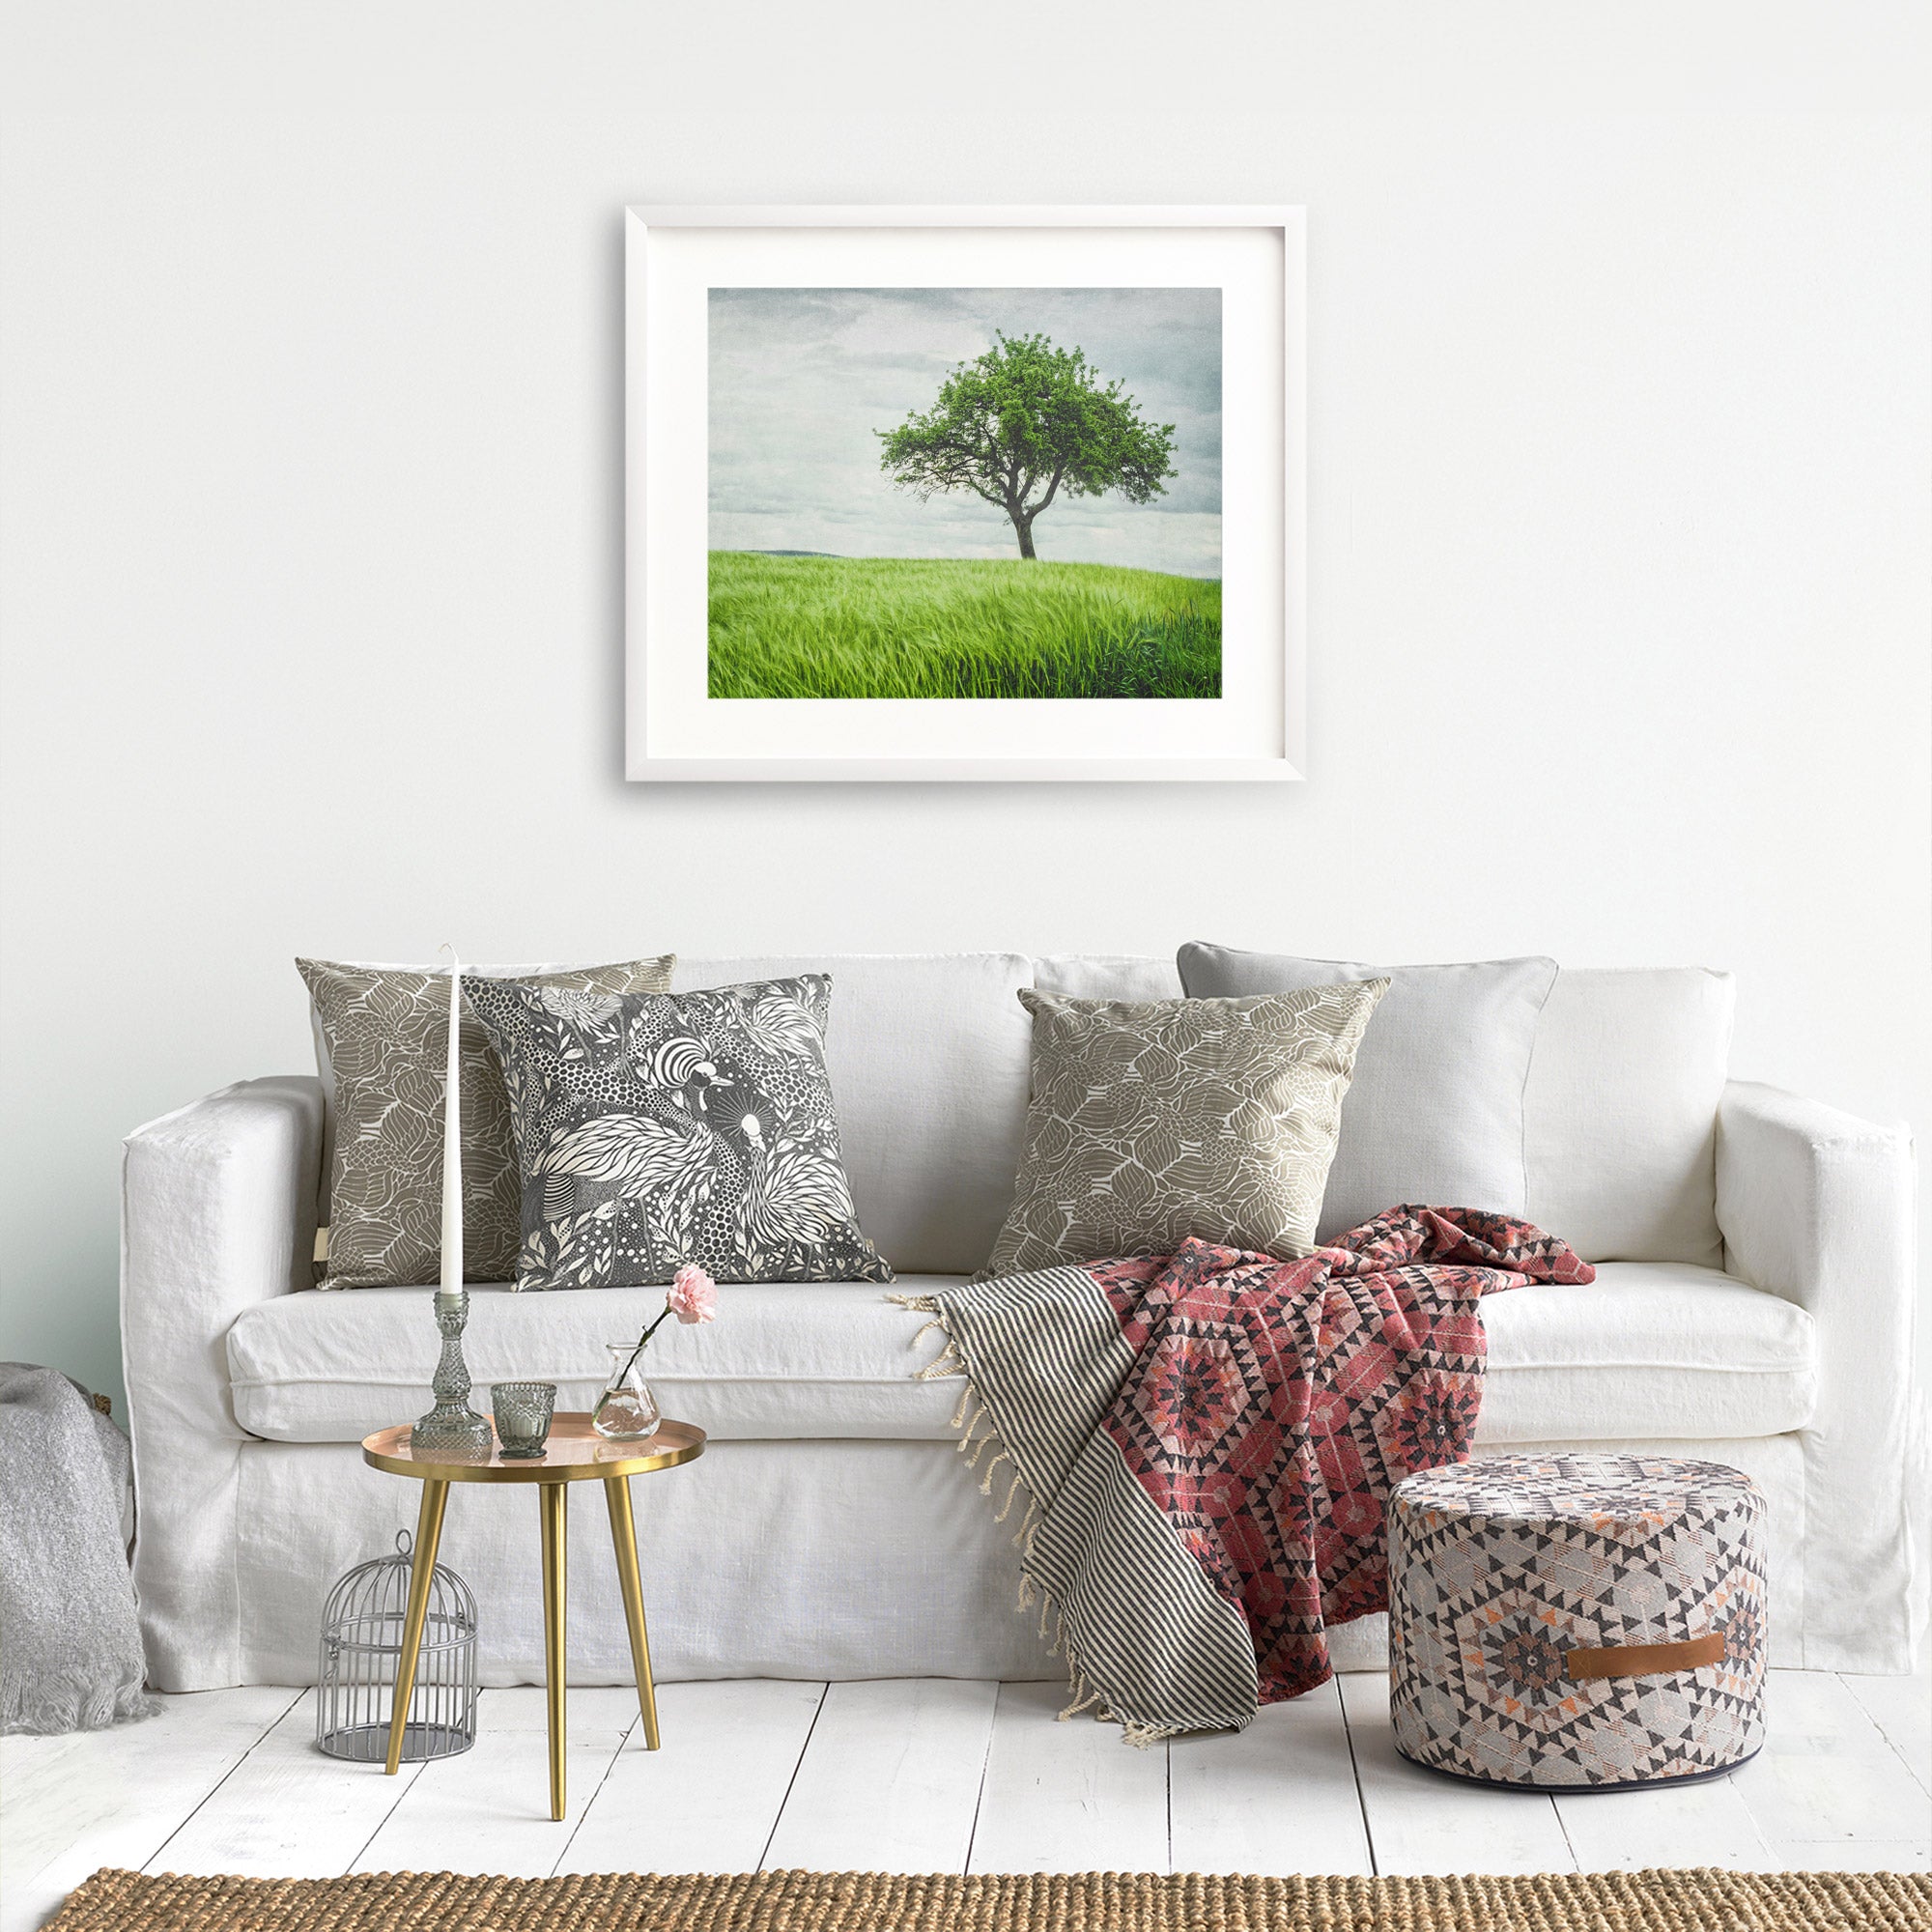 A cozy living room features a white sofa adorned with patterned cushions and a red patterned throw. A small round table with a vase and candle holder sits in front. A framed Offley Green Rustic Countryside Print, 'Tree in a Field' hangs on the wall, and a pouf rests on a woven rug.